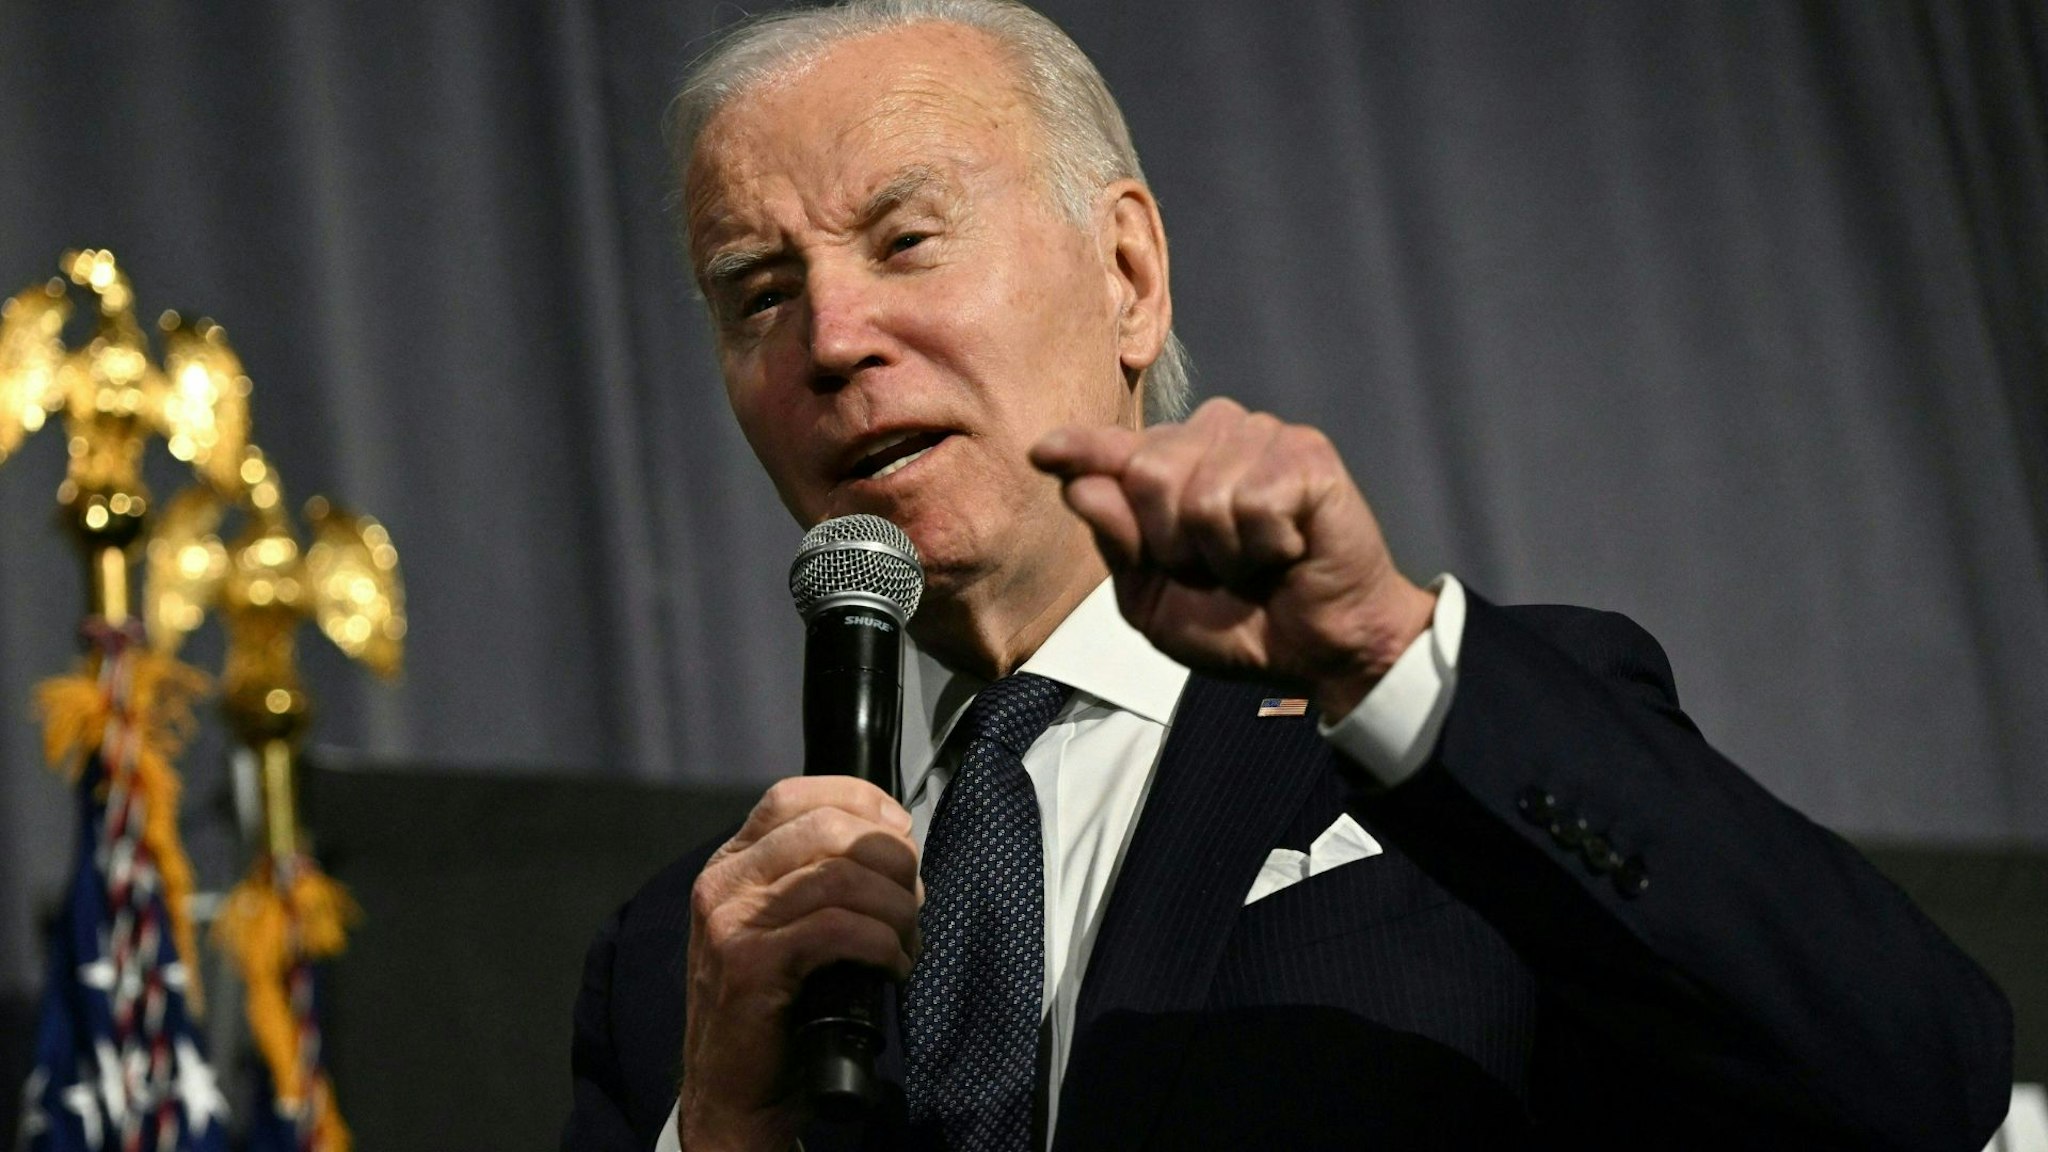 US President Joe Biden delivers remarks at the National Action Network's (NAN) Martin Luther King, Jr. day breakfast at the Mayflower Hotel in Washington, DC, January 16, 2023.